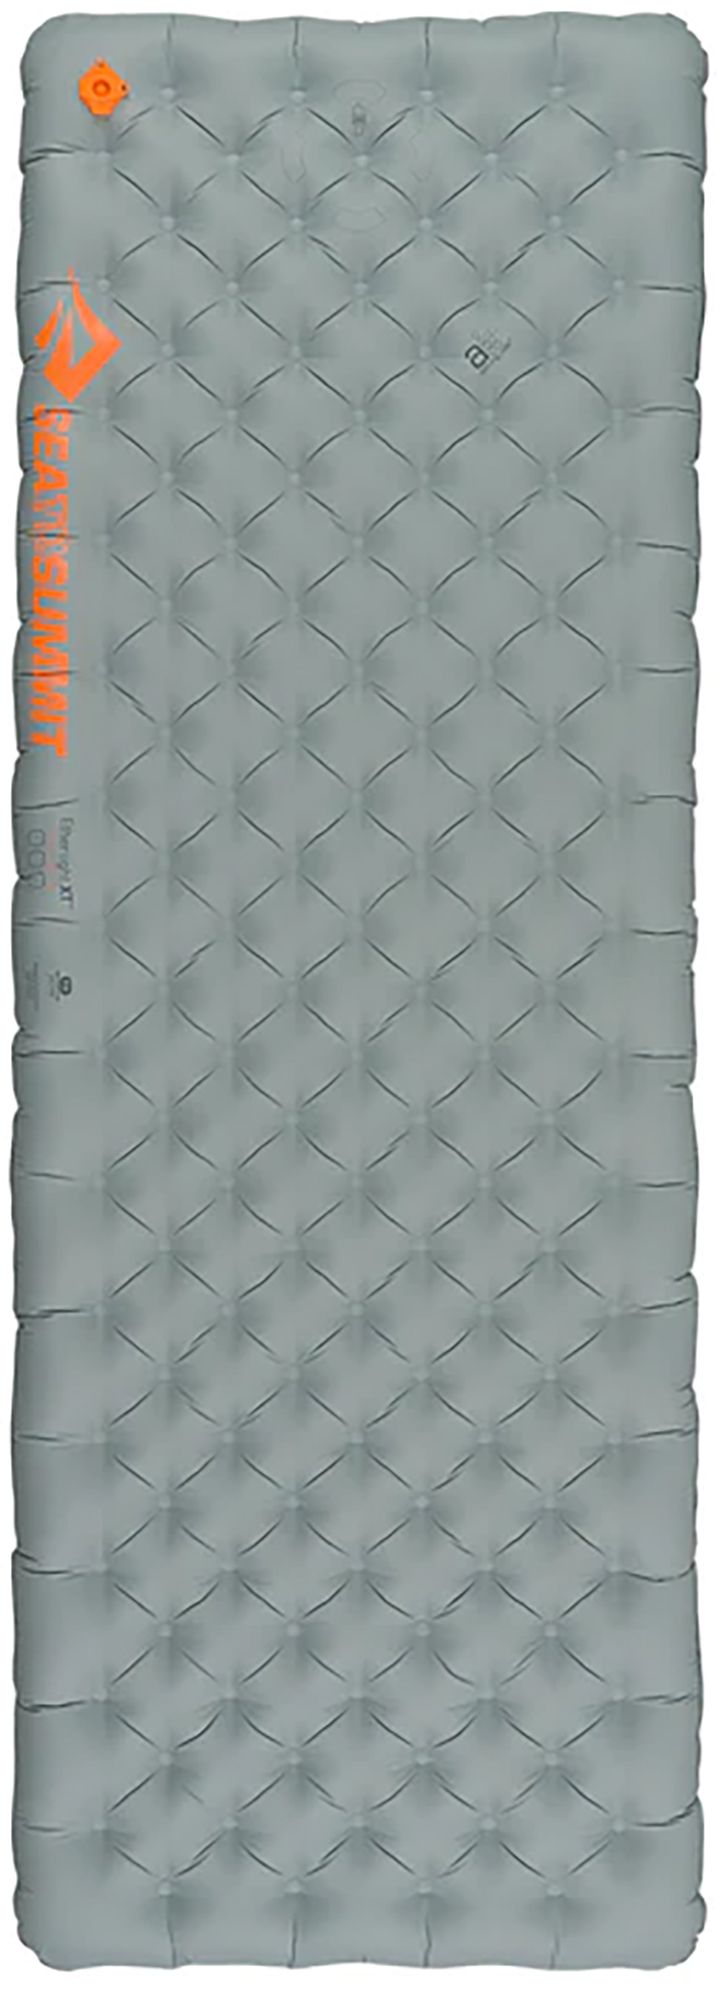 Photos - Bed Linen Sea To Summit Ether Light XT Insulated Mat, Wide, Silver 23S2SUTHRLGHTXTNS 